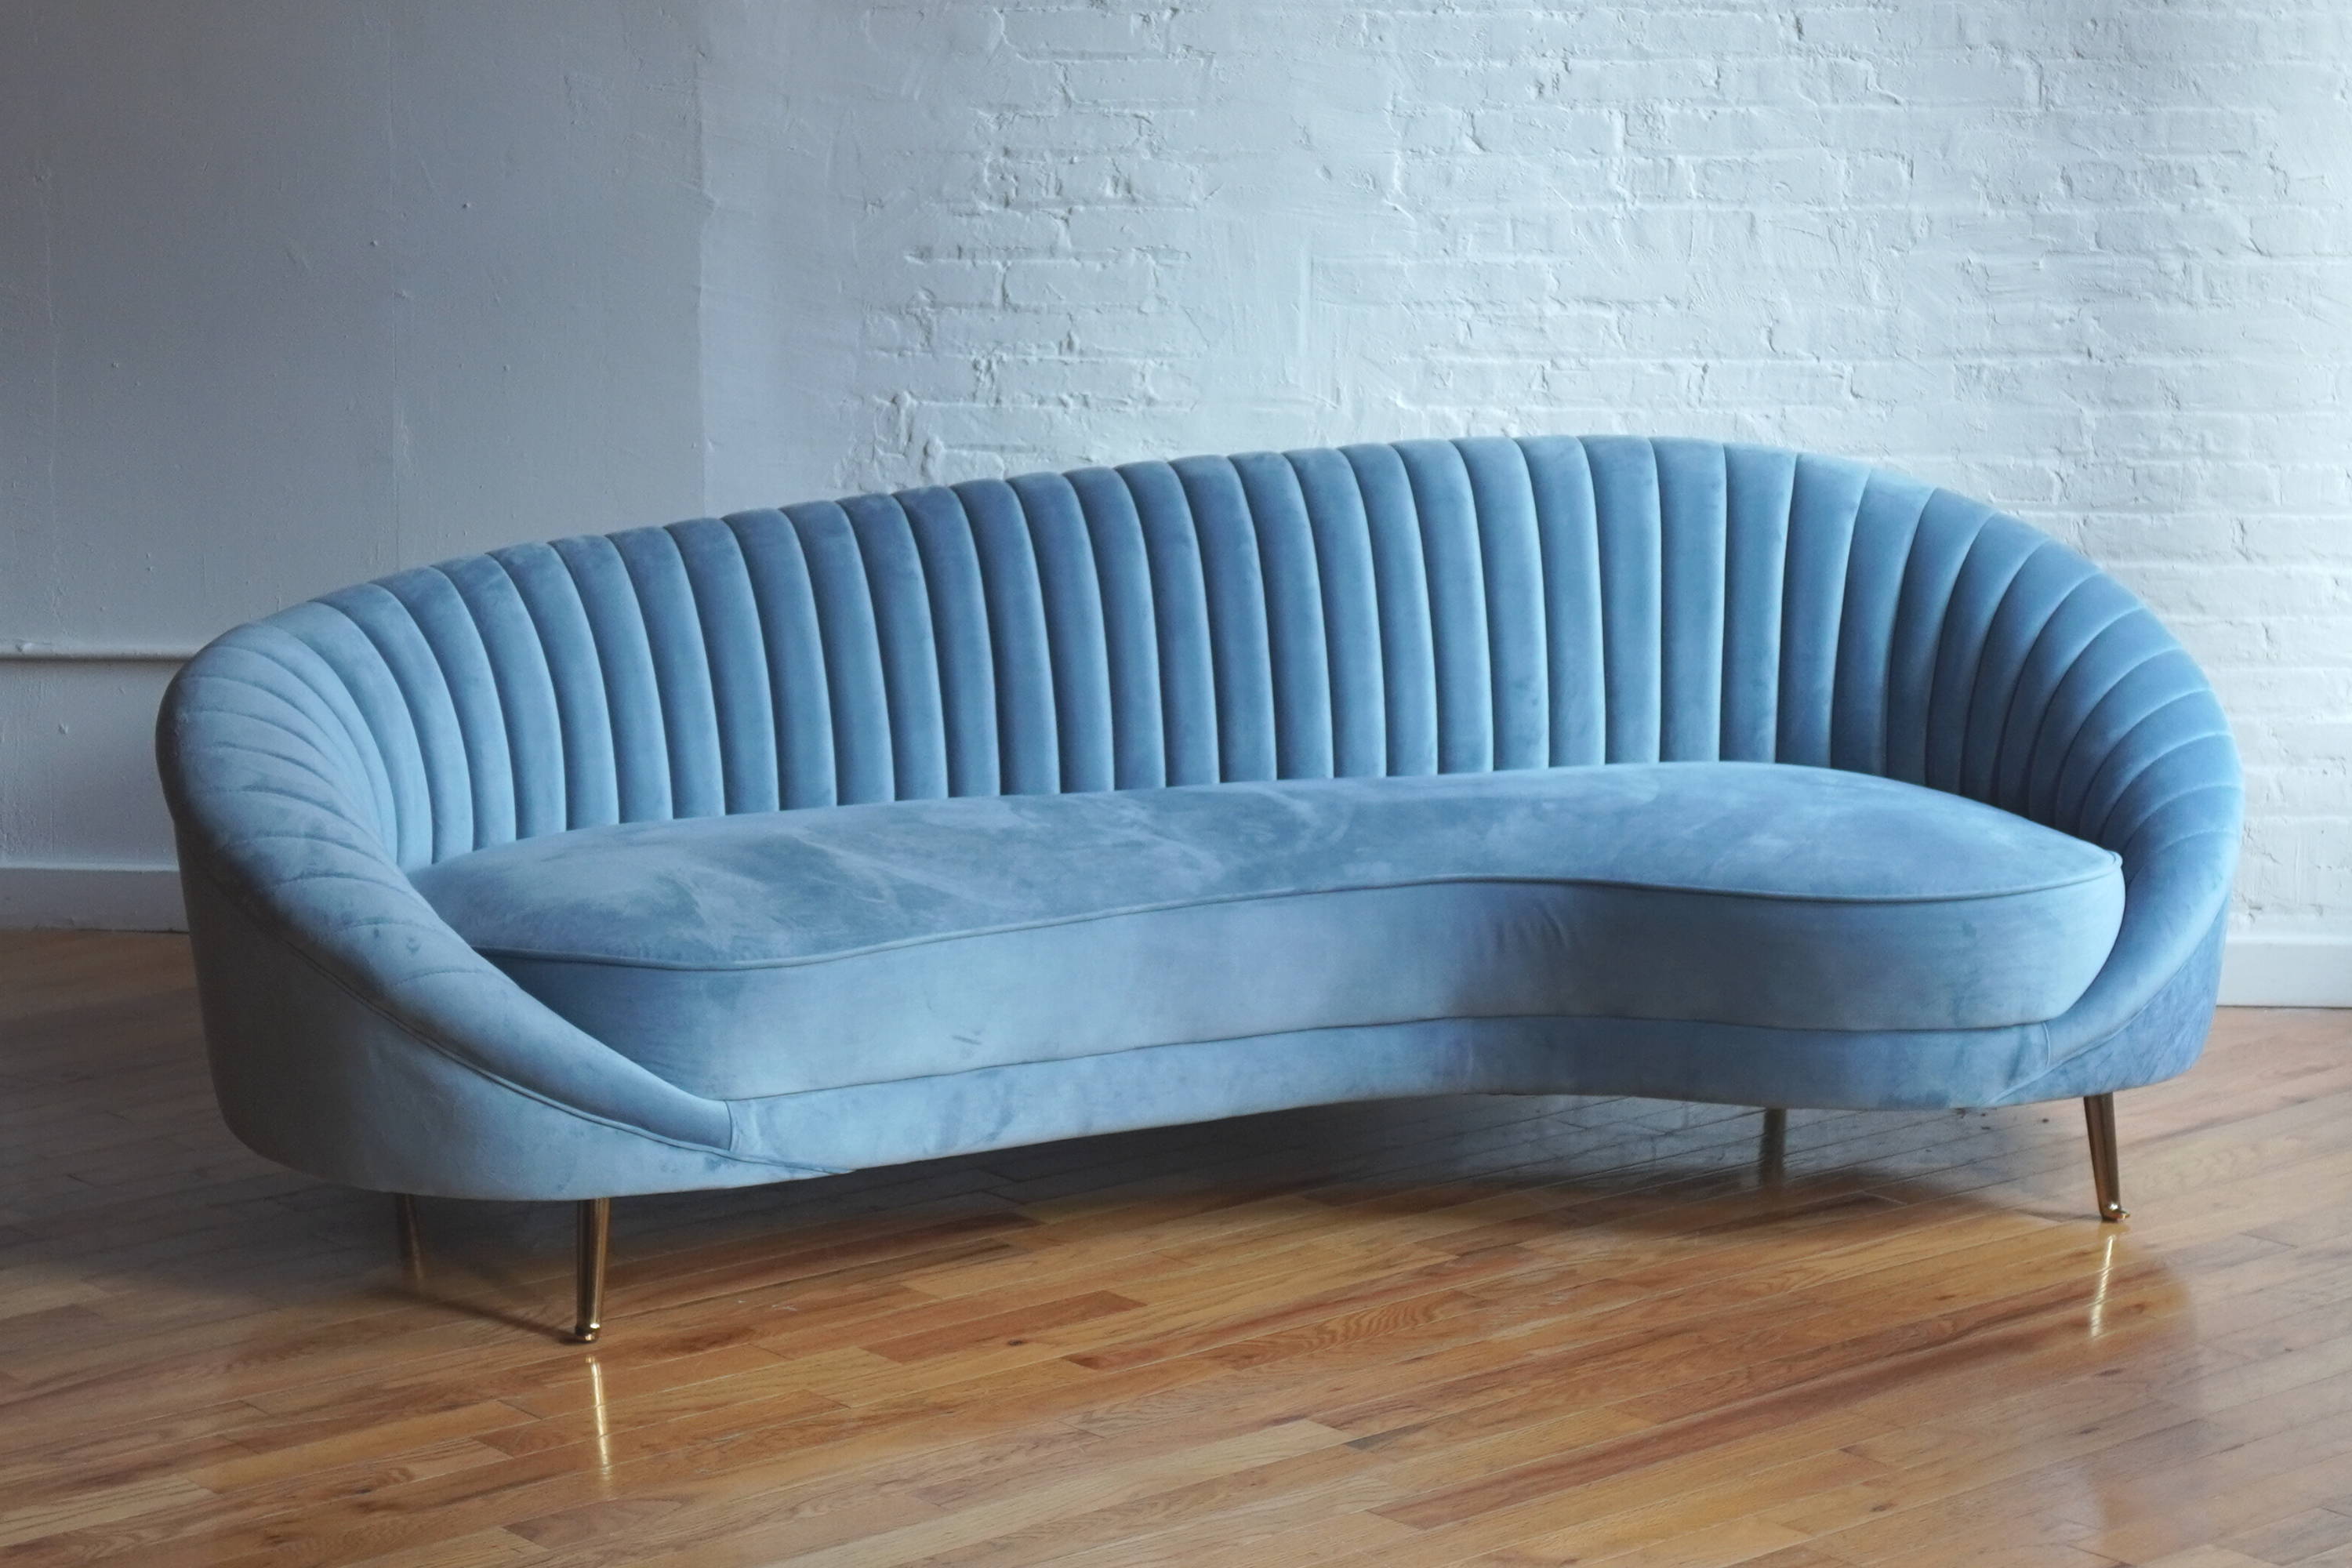 Velvet sofa,sofas,couch,couches,loveseat,Curved Sofa